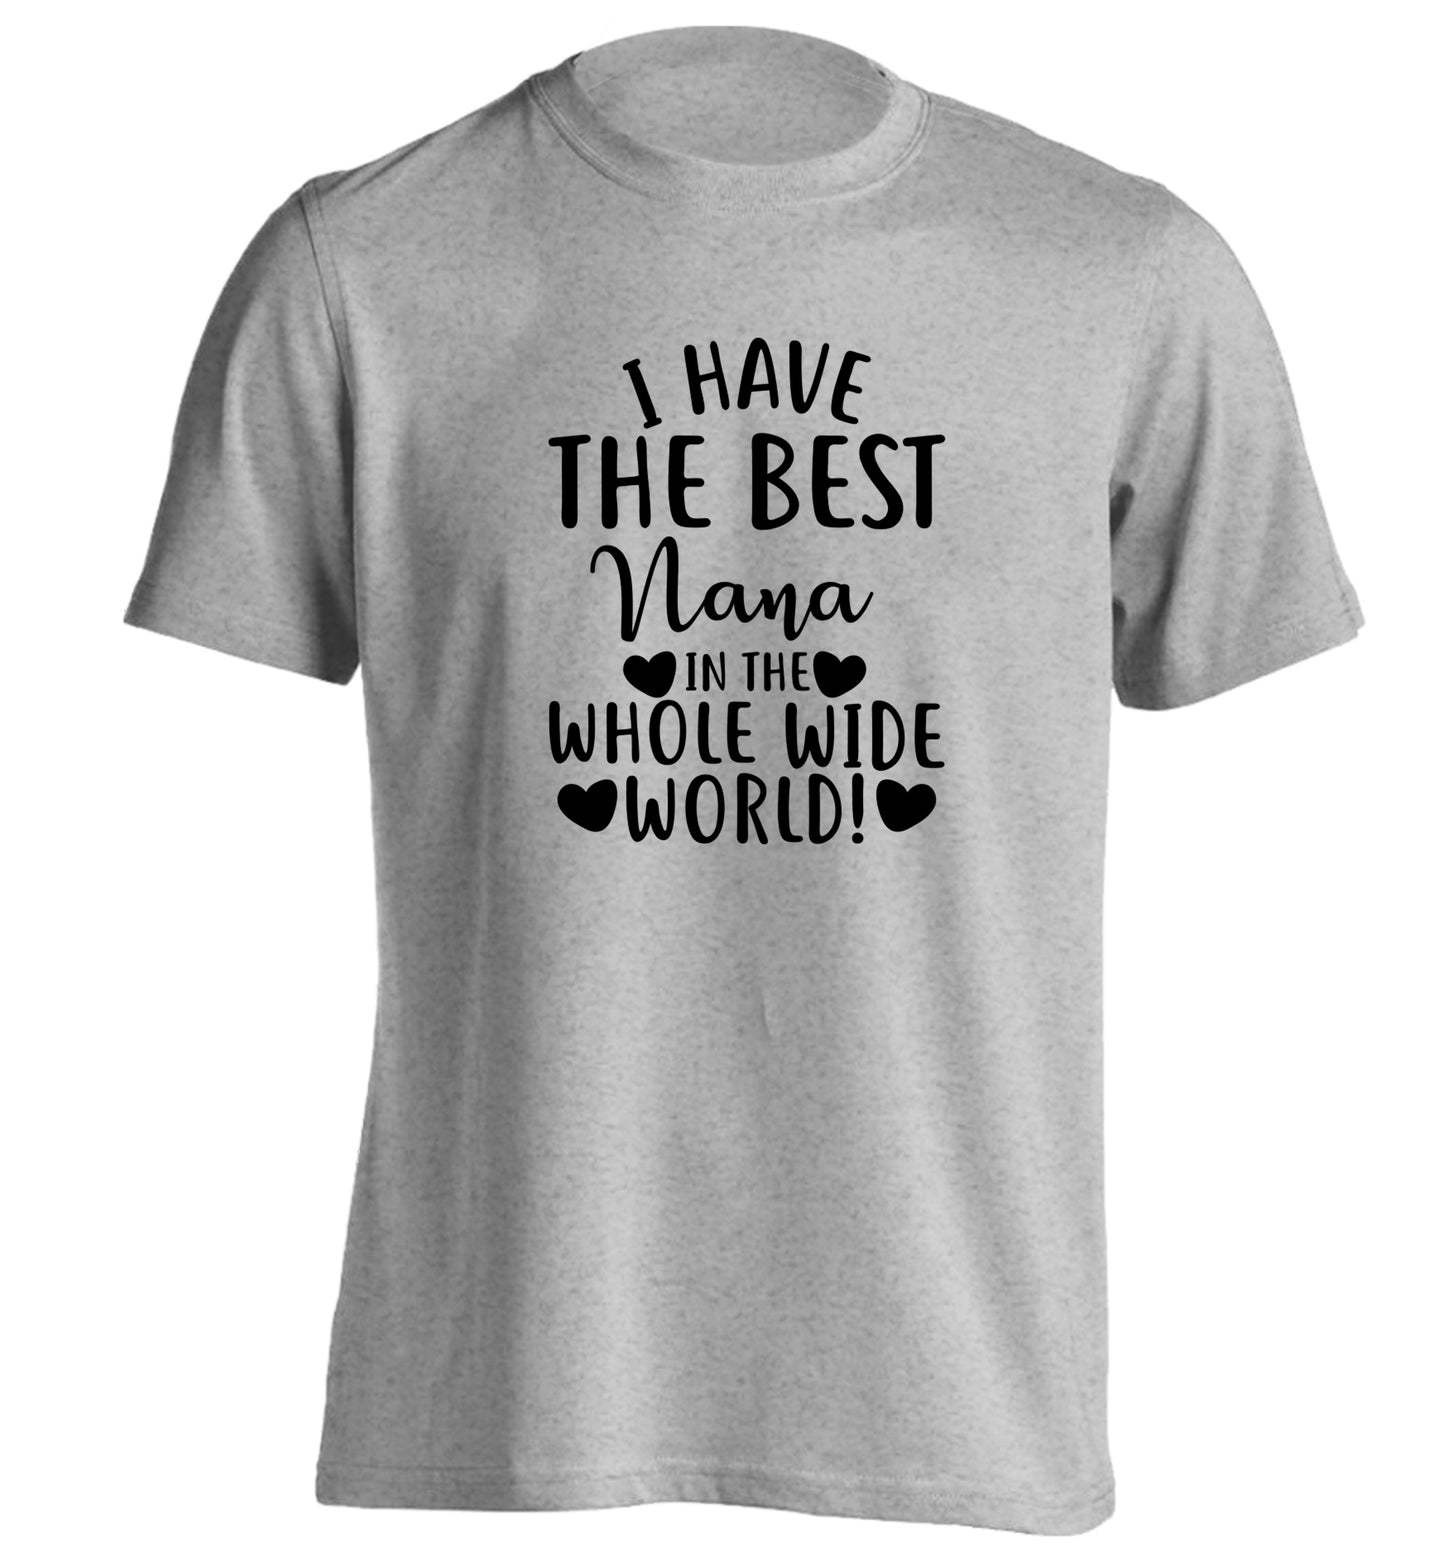 I have the best nana in the whole wide world! adults unisex grey Tshirt 2XL